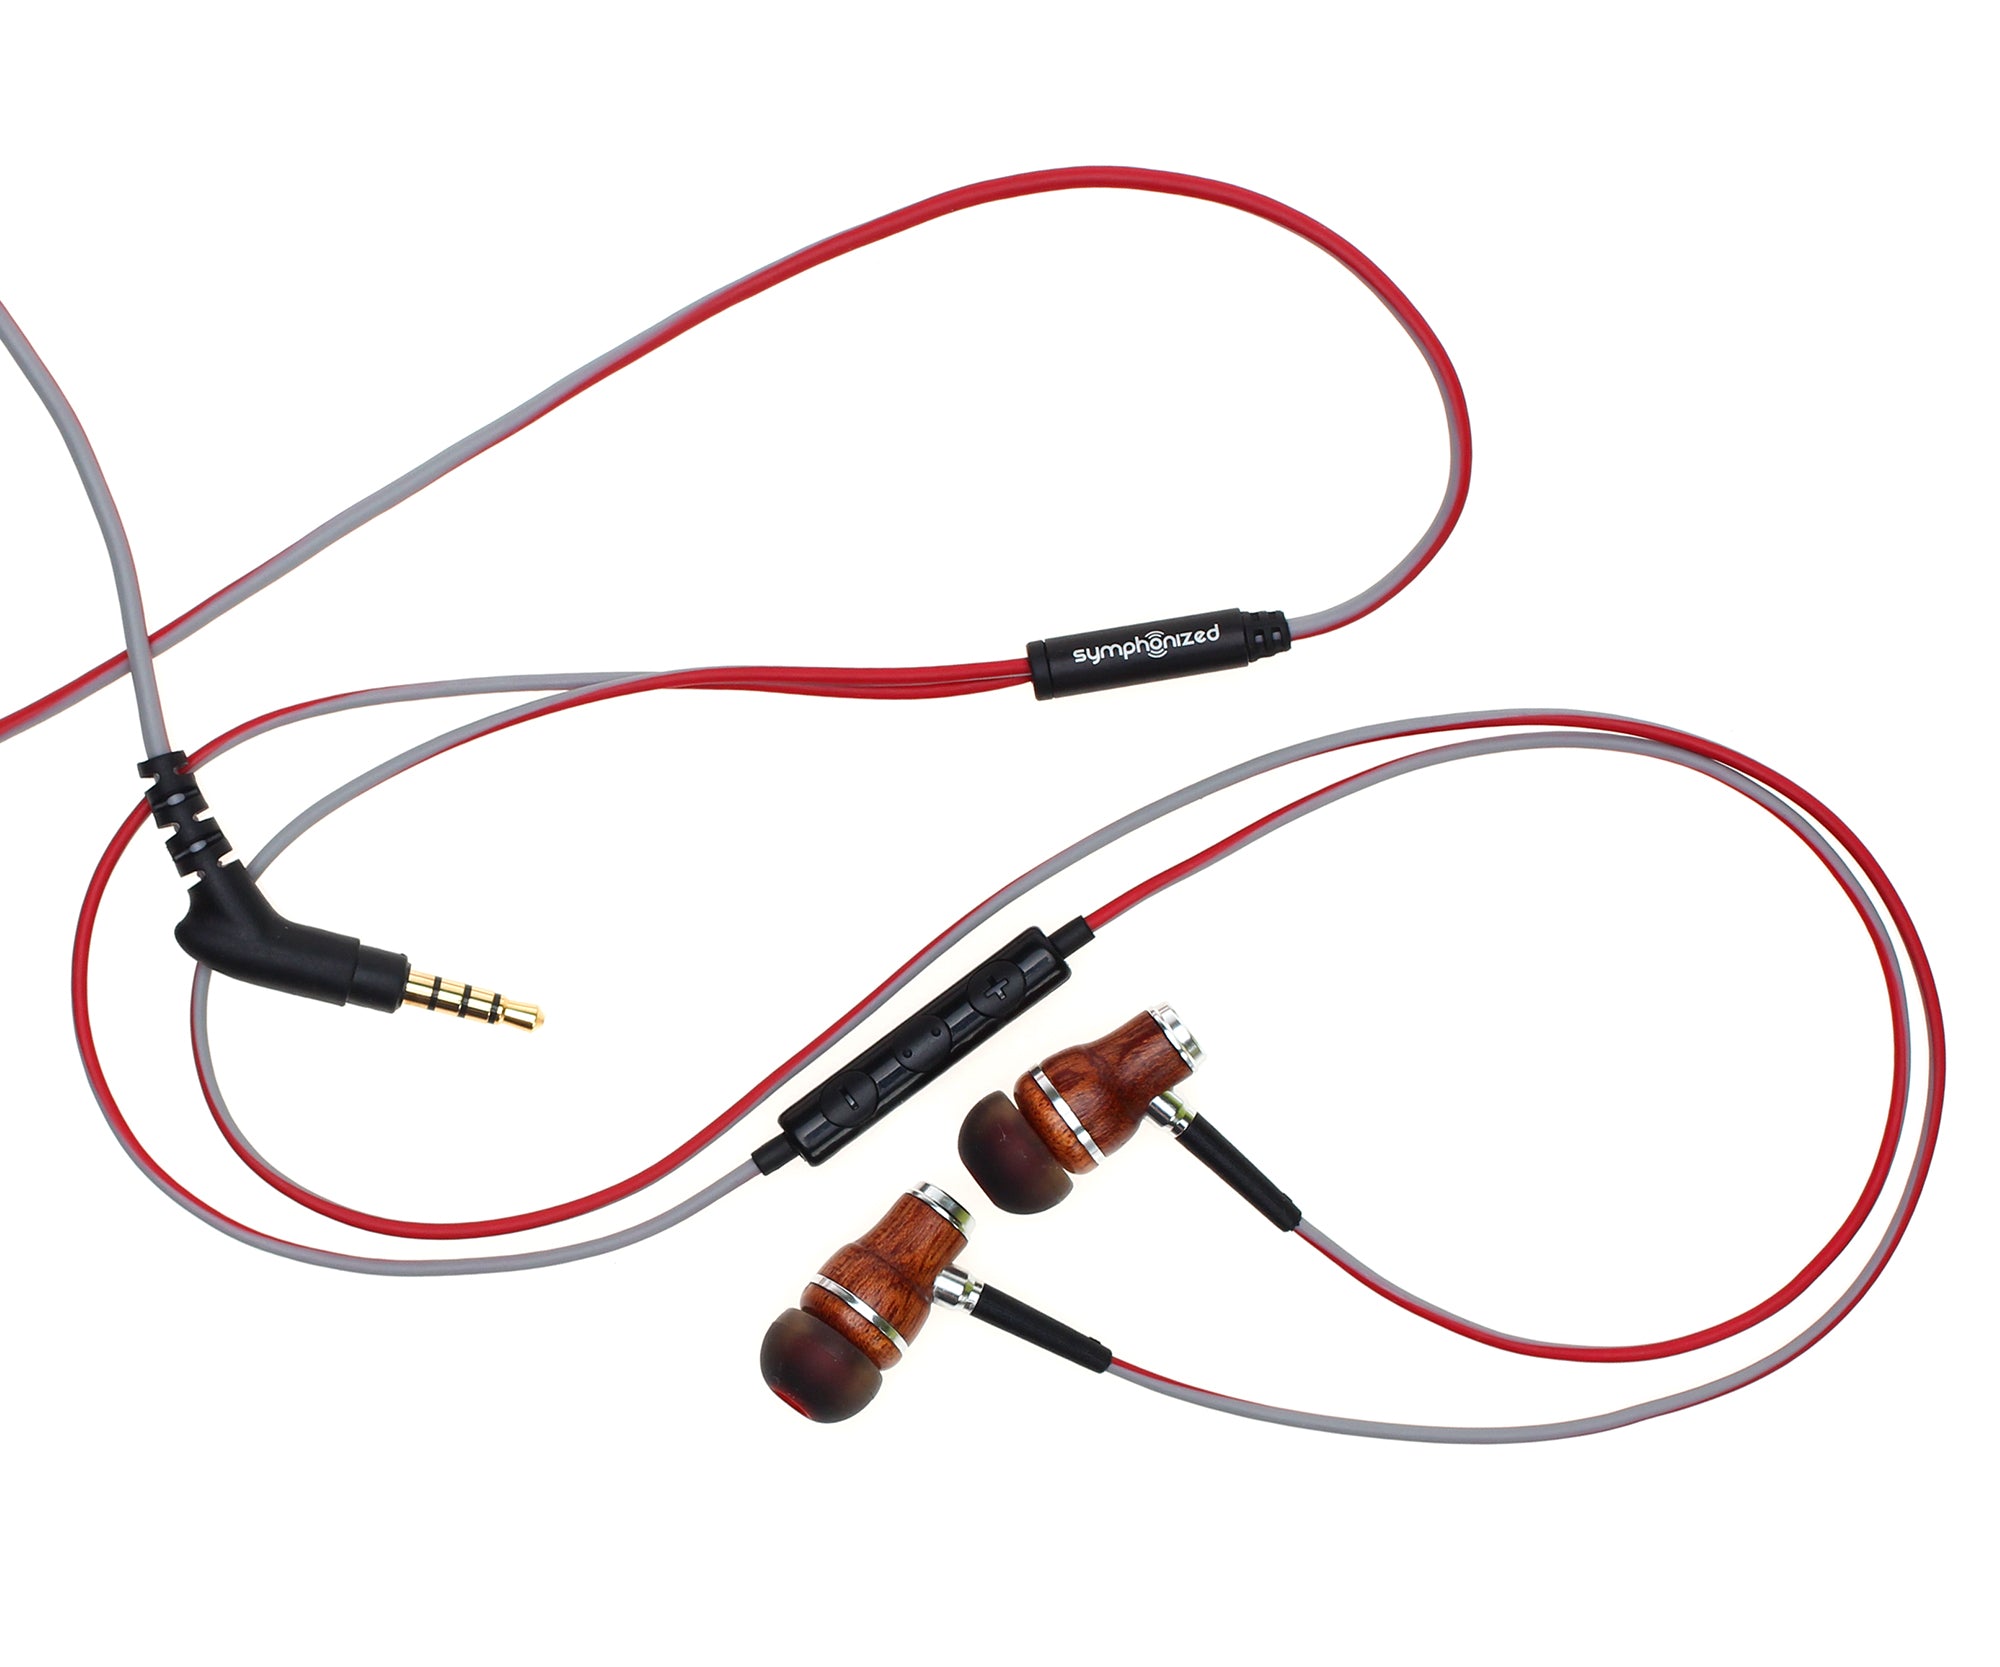 NRG 3.0 In-Ear Wood Headphones - Red and Gray – Symphonized